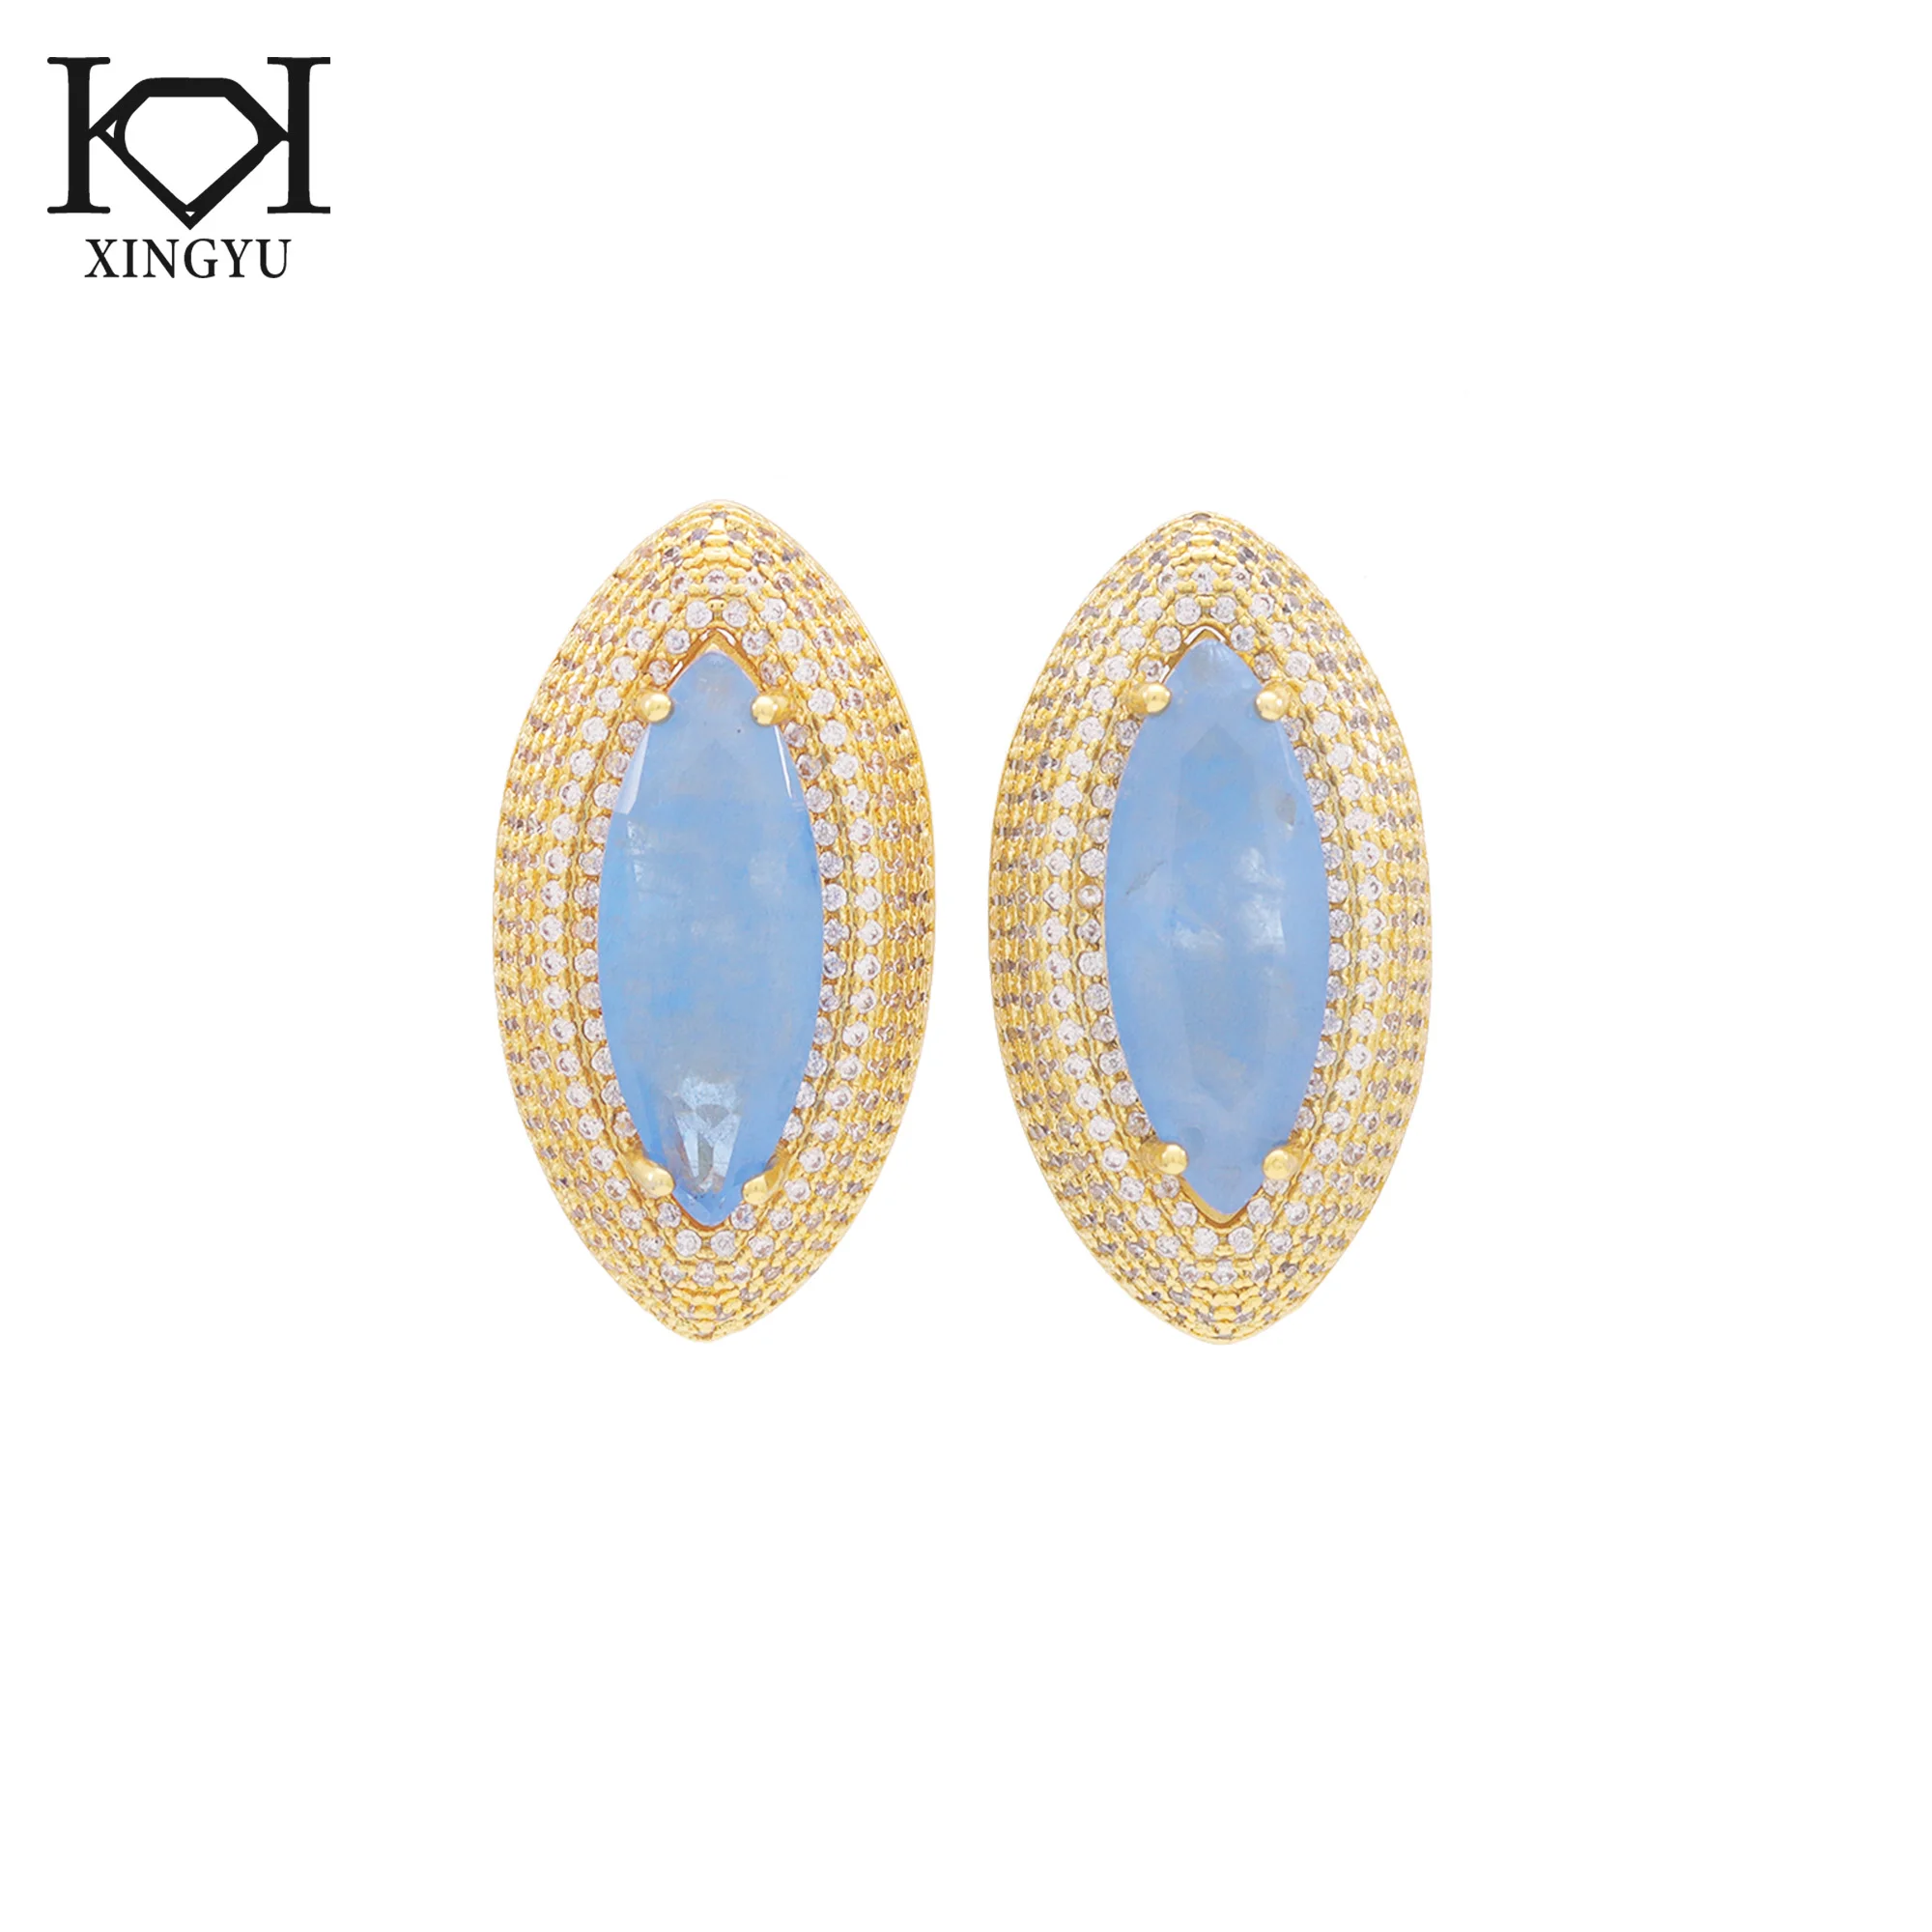 Luxury Marquise Cut Semi - Precious Stone Jewelry Blue And Pink Stud Earrings